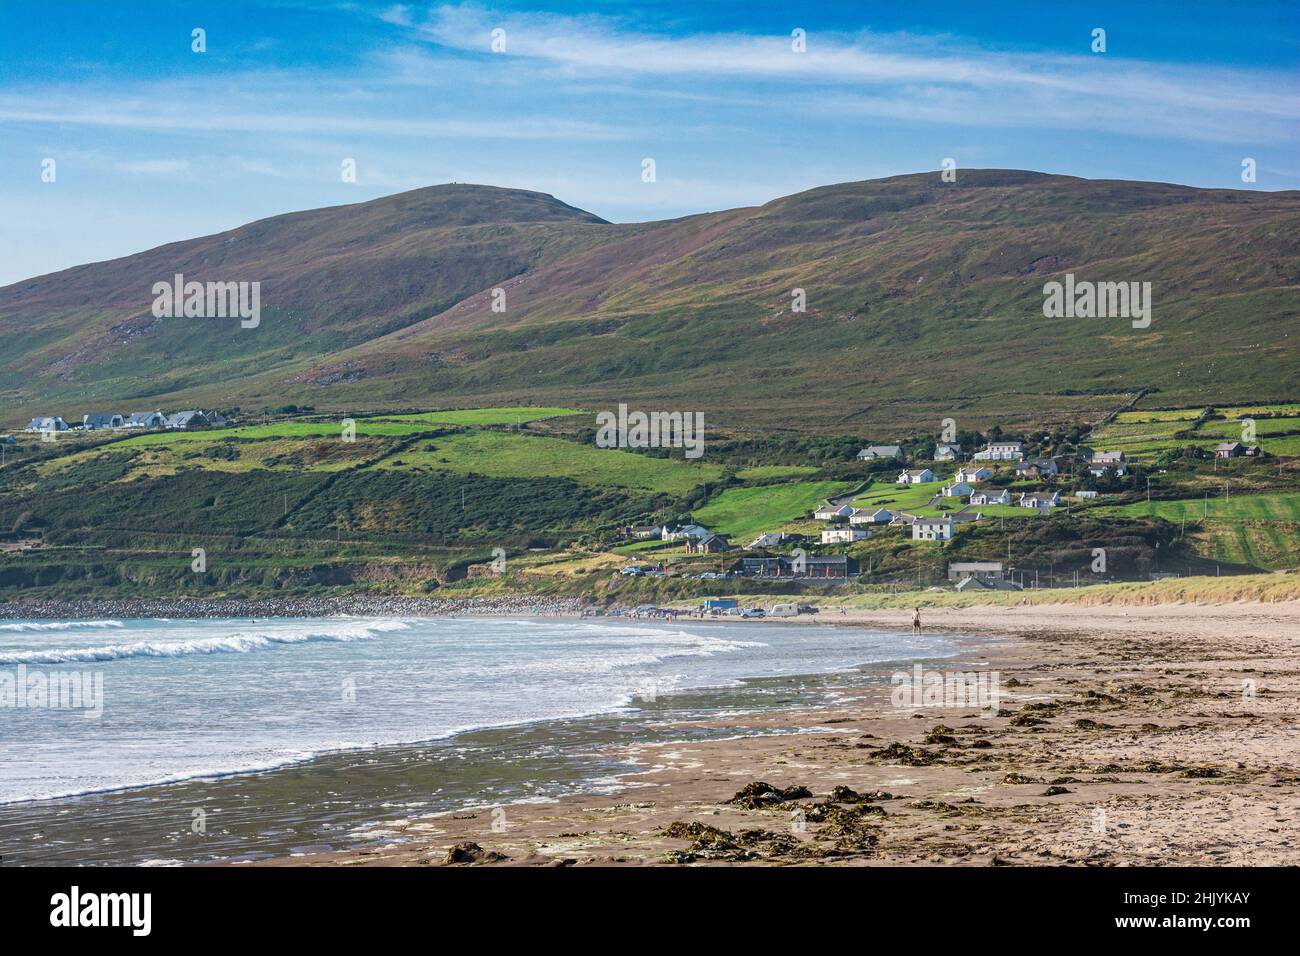 View of the beach and the village of Inch Beach in  Dingle Peninsula, Ireland Stock Photo